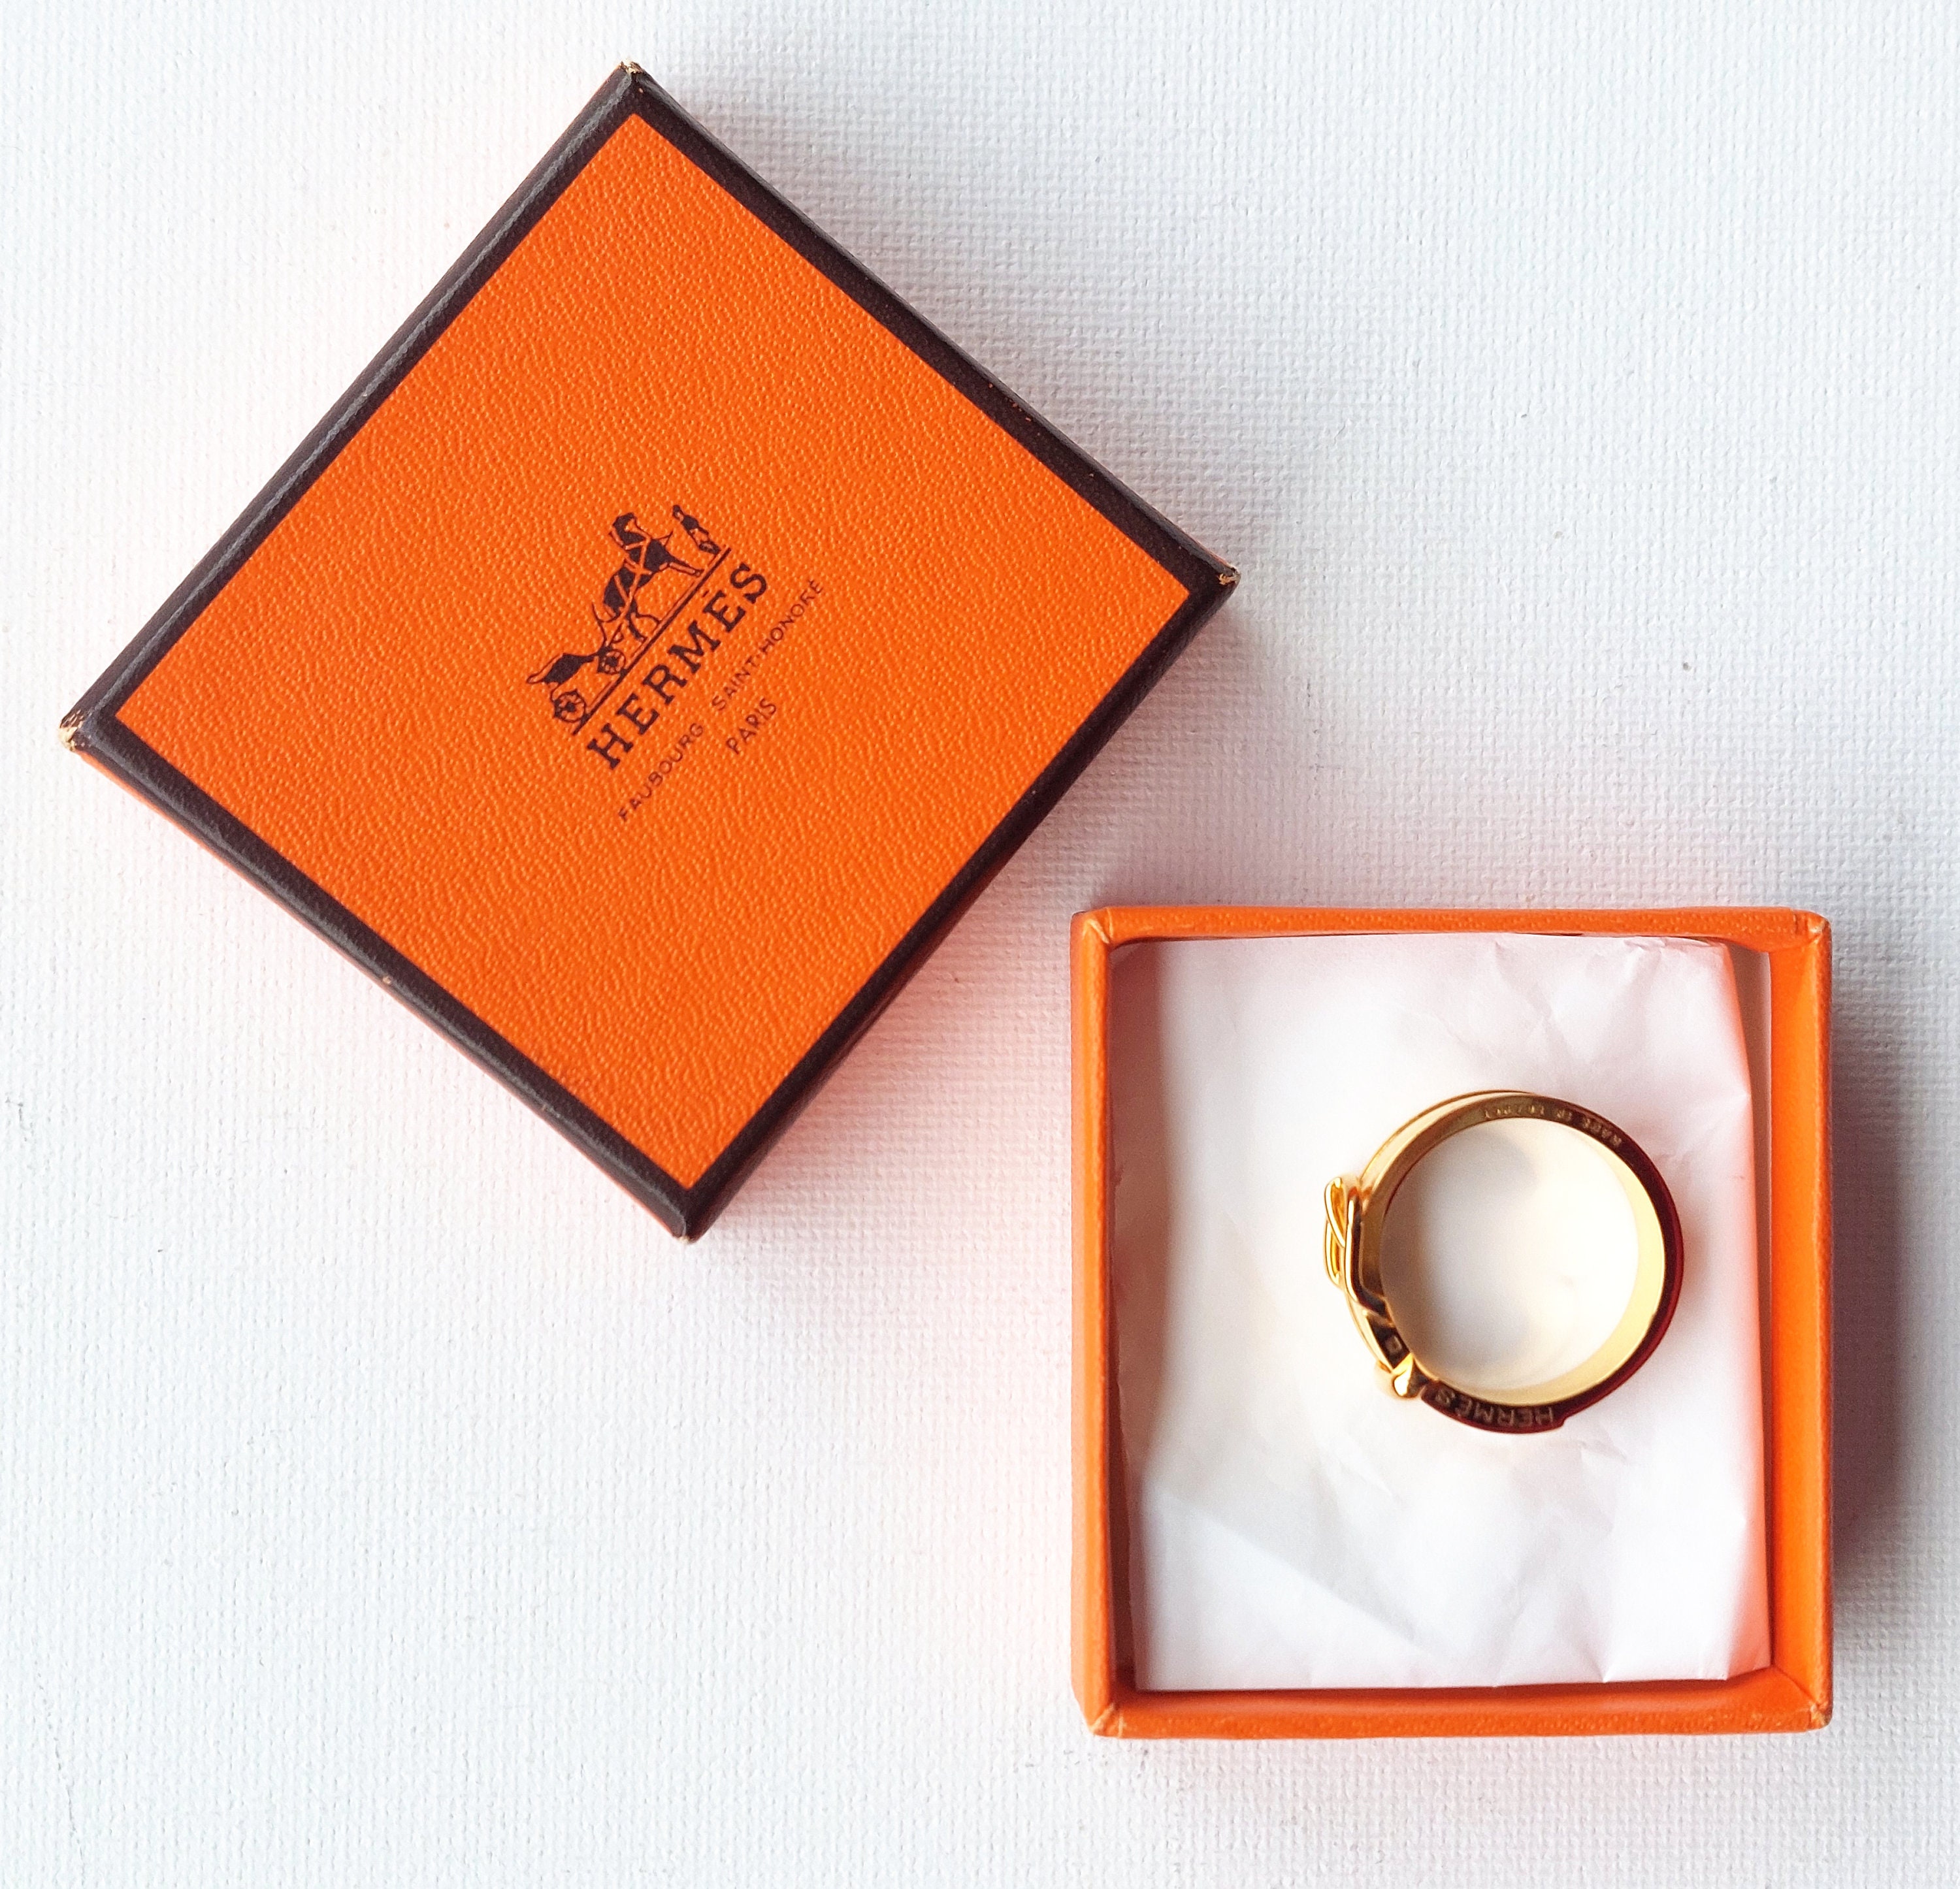 Quick way to authenticate your #Hermes box / item #hermesbox